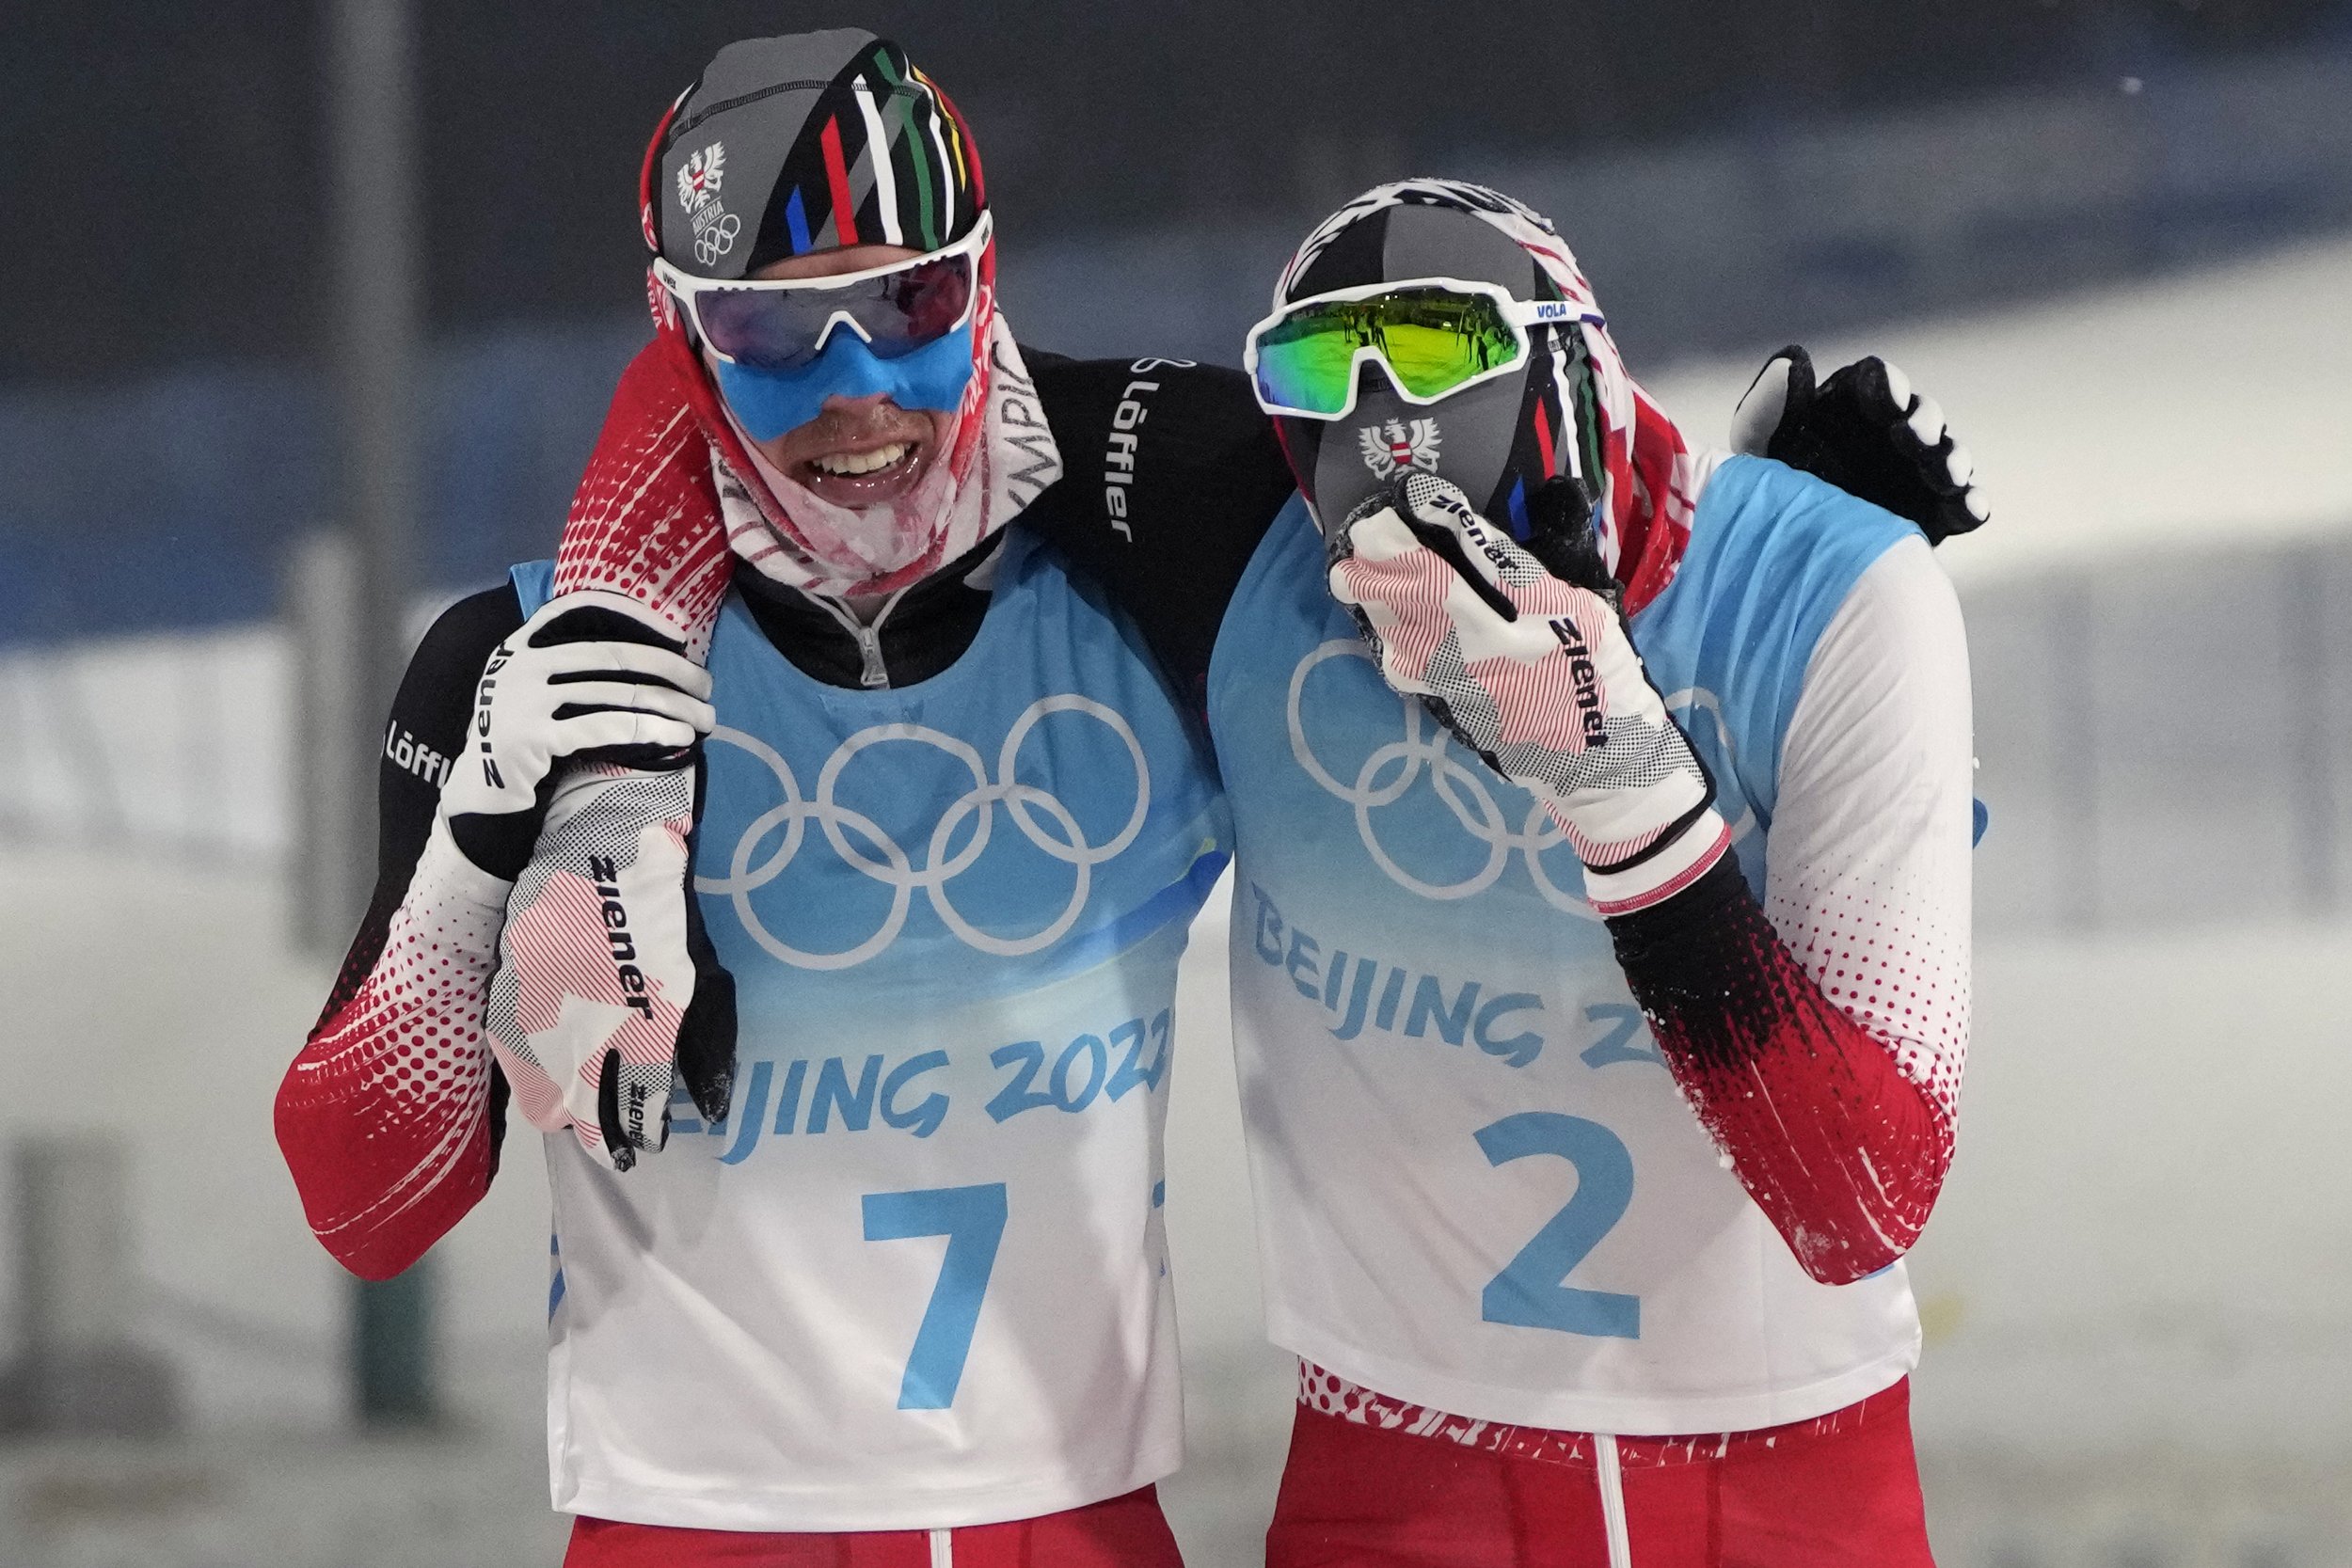  Austria's Franz-Josef Rehrl, left, celebrates with bronze medal finisher Austria's Lukas Greiderer, right, after the cross-country skiing portion of the individual Gundersen normal hill/10km event at the 2022 Winter Olympics, Wednesday, Feb. 9, 2022